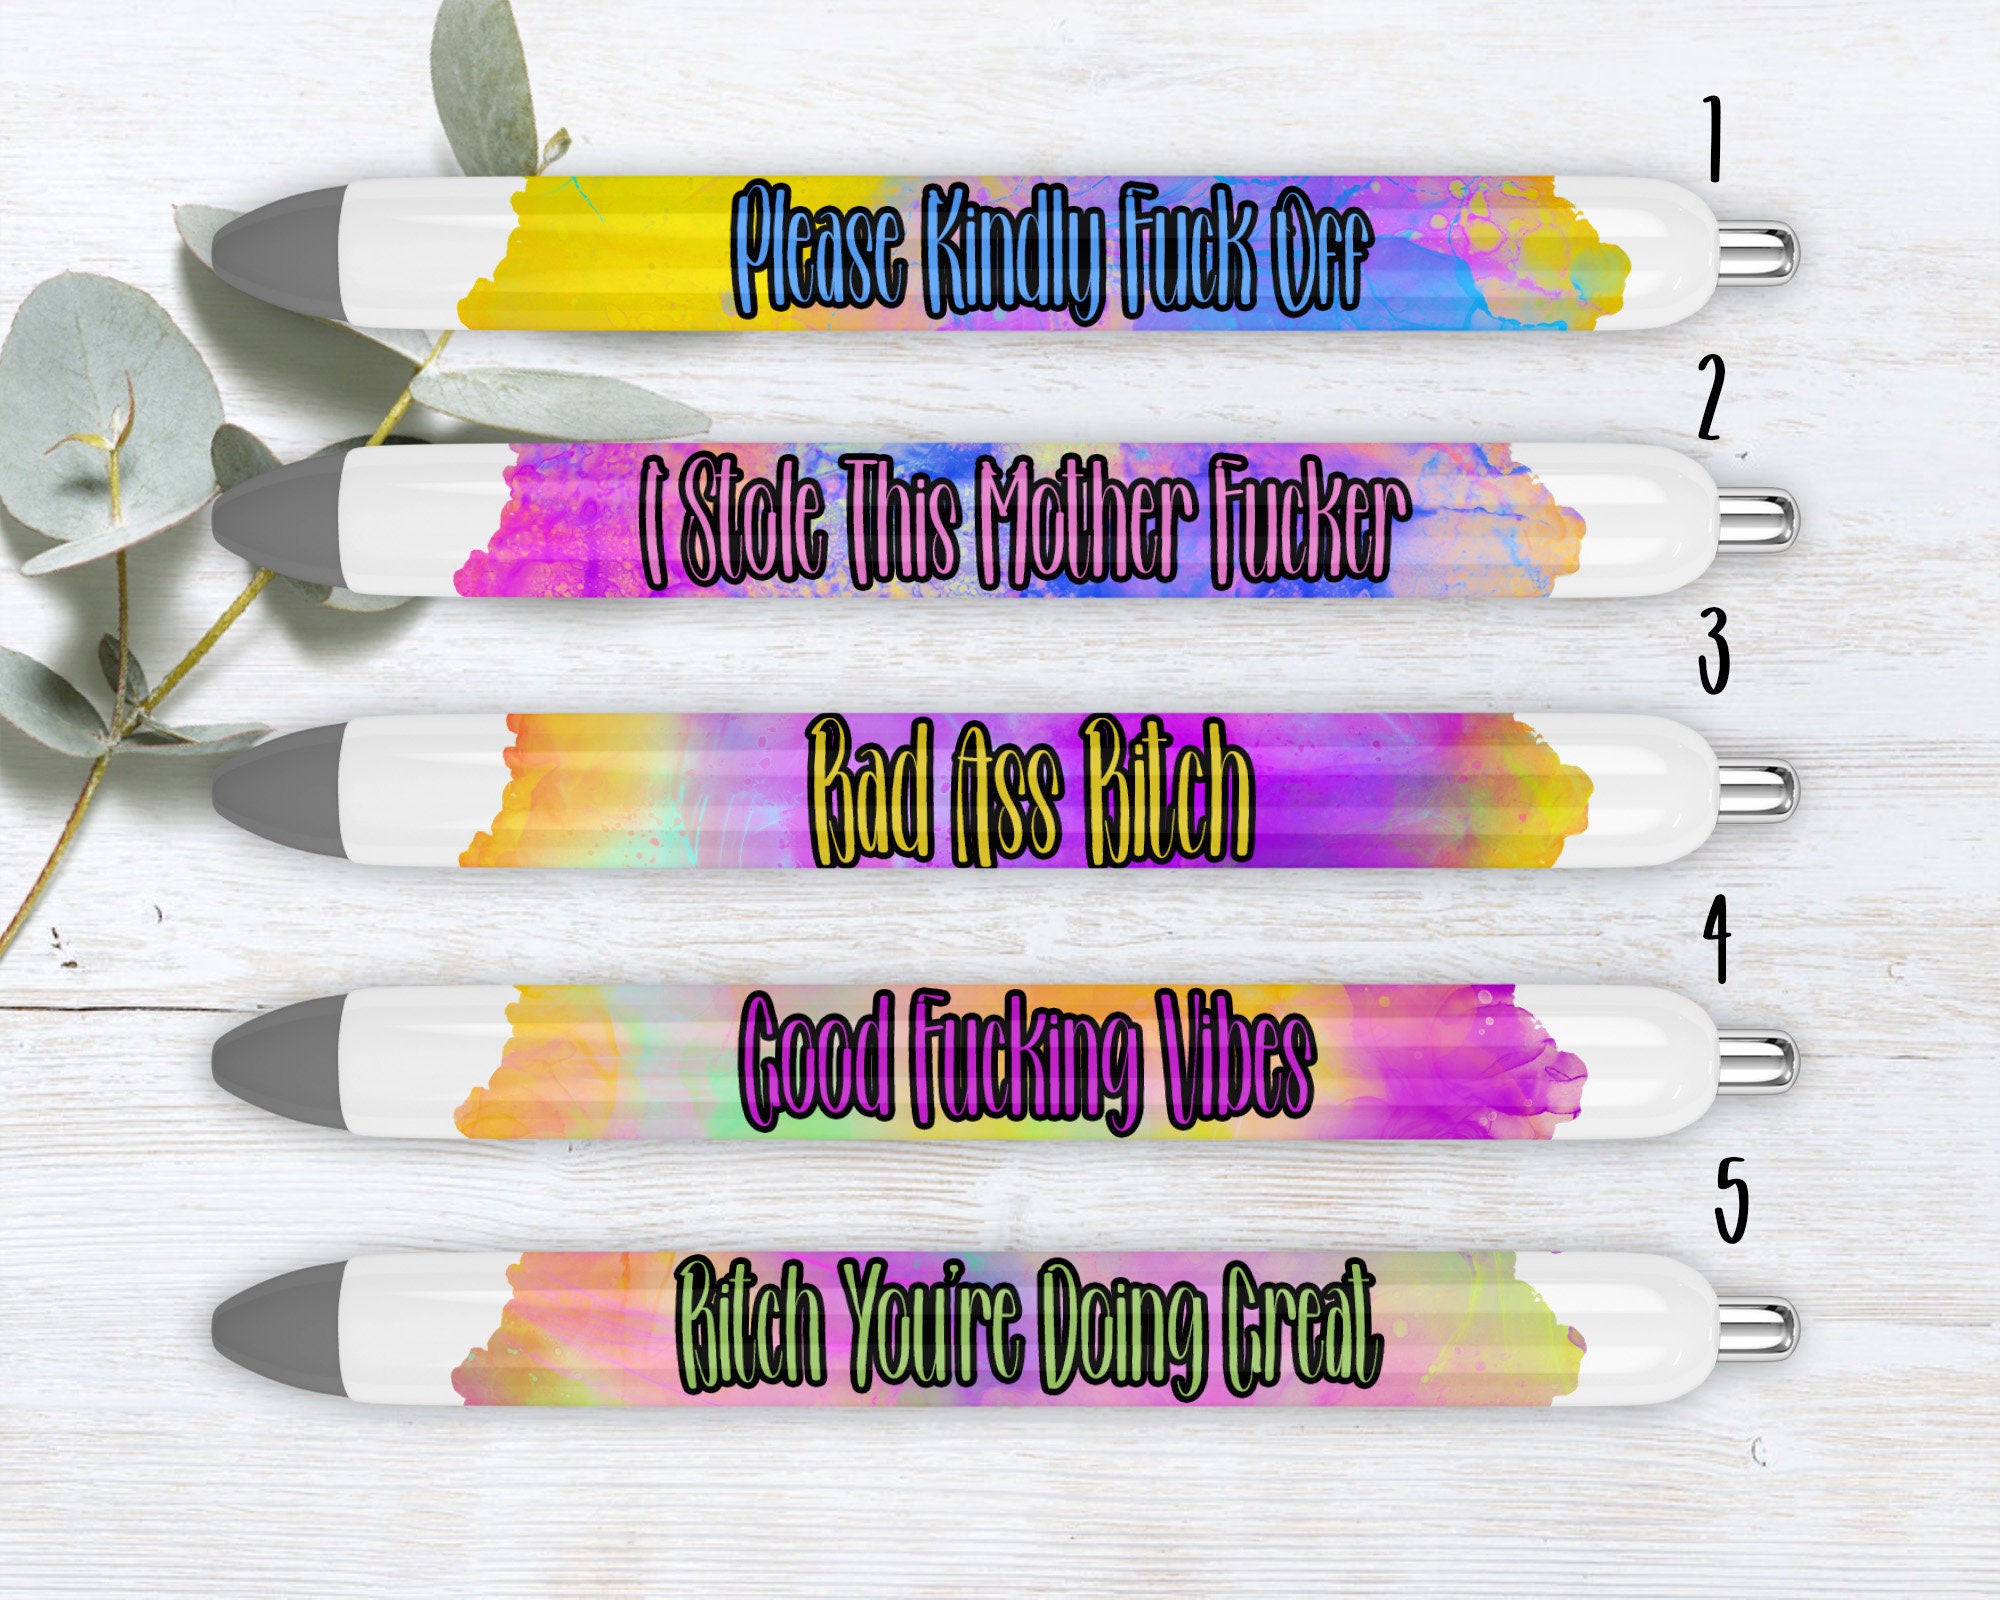 XINRUI 10 Pcs Funny Ballpoint Pen Novelty Rude Metal Pens Sarcastic Stylus  Pens with Demotivational Complaining Quotes Black Ink Snarky Stationery Pens  for School Teacher Students by Unbranded - Shop Online for